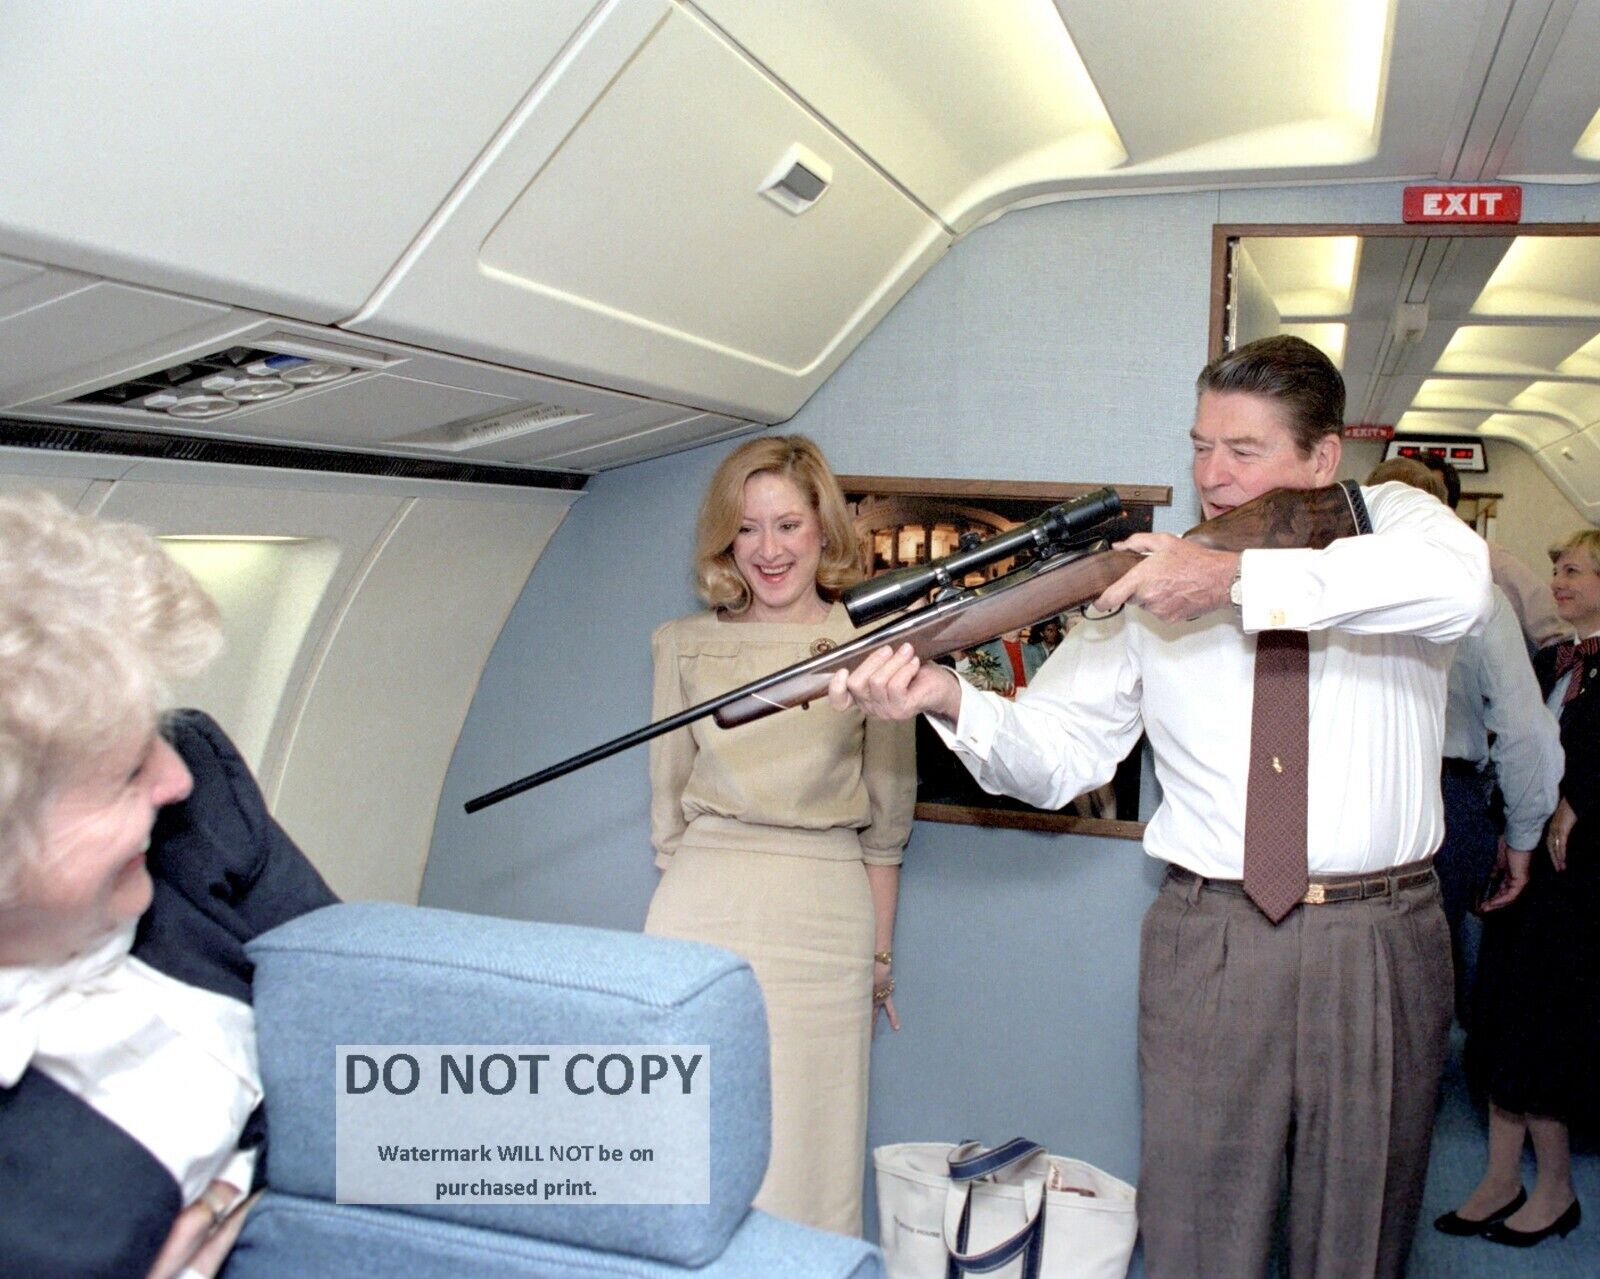 PRESIDENT RONALD REAGAN AIMING A RIFLE ABOARD AIR FORCE ONE - 8X10 PHOTO (RT784)